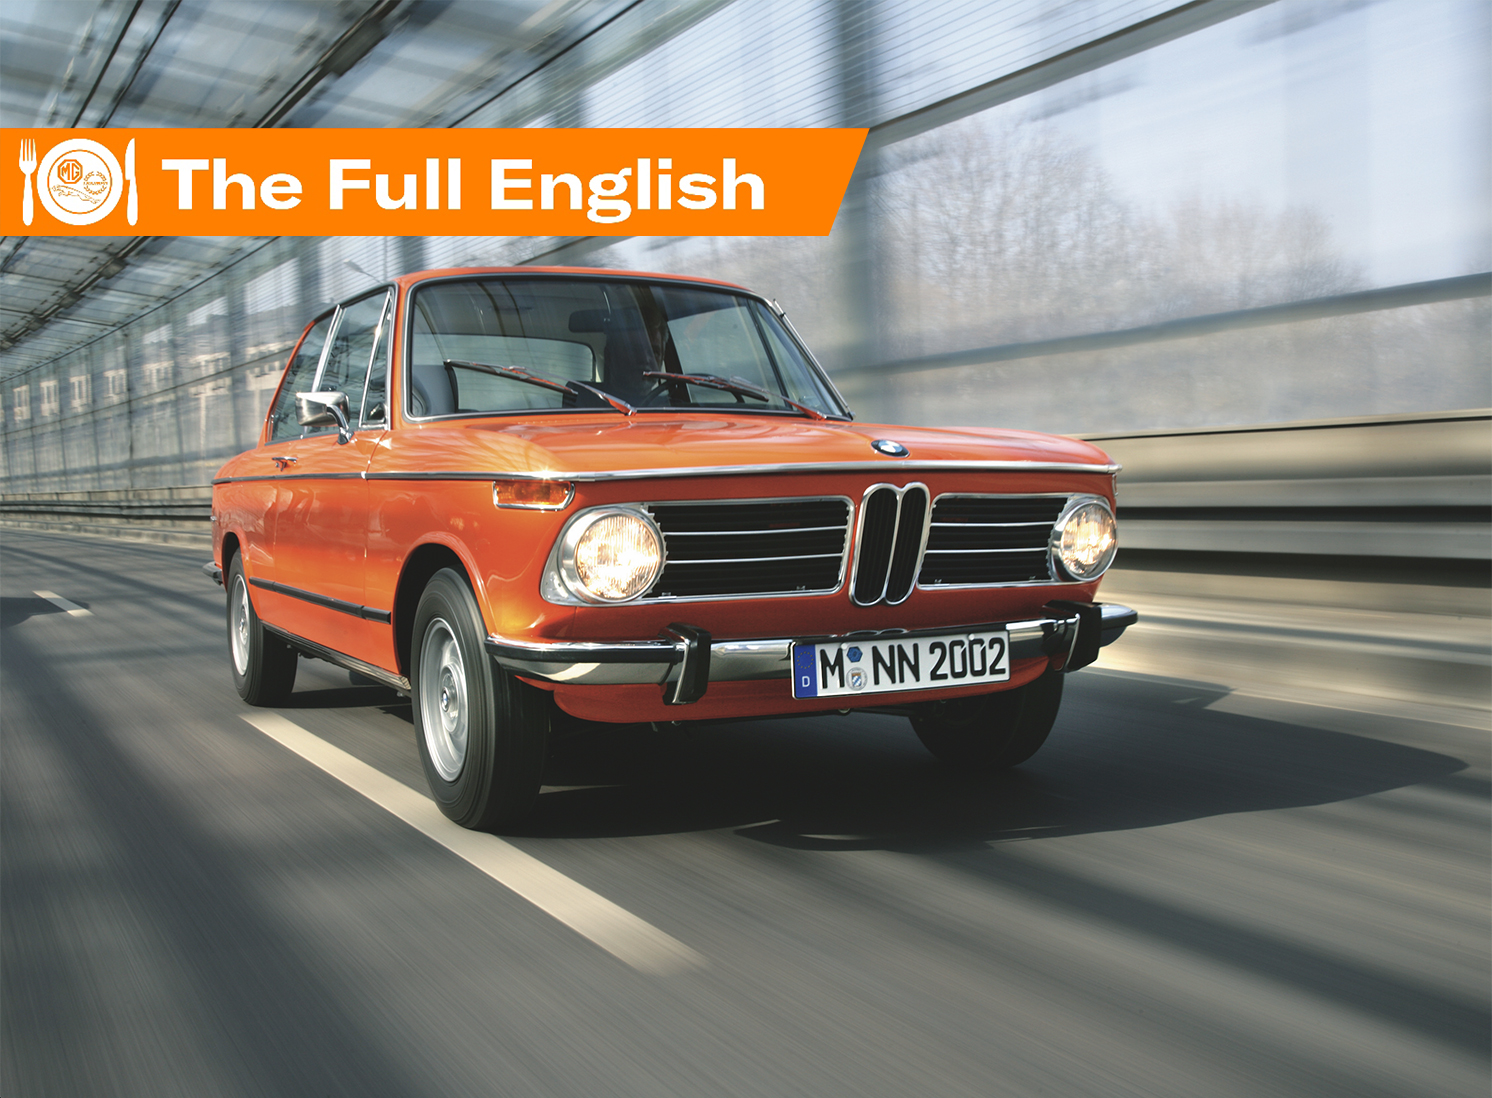 Full English: The BMW 2002 has always been head of the Klasse